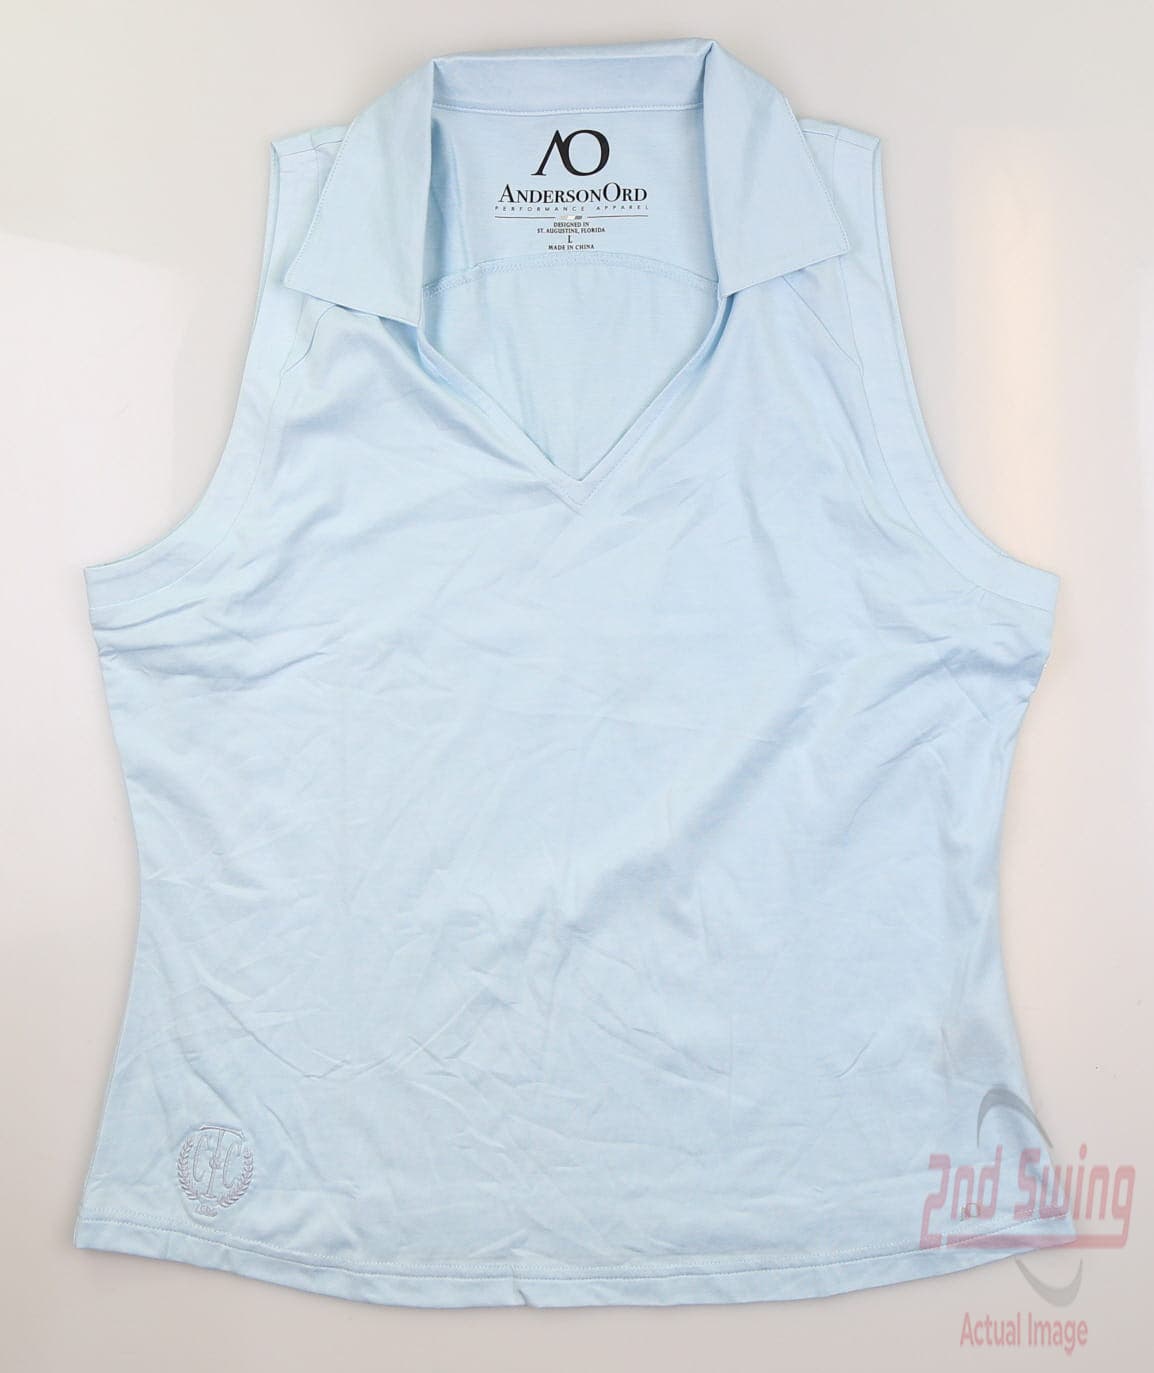 AndersonOrd  Performance Apparel – AndersonOrd Performance Apparel